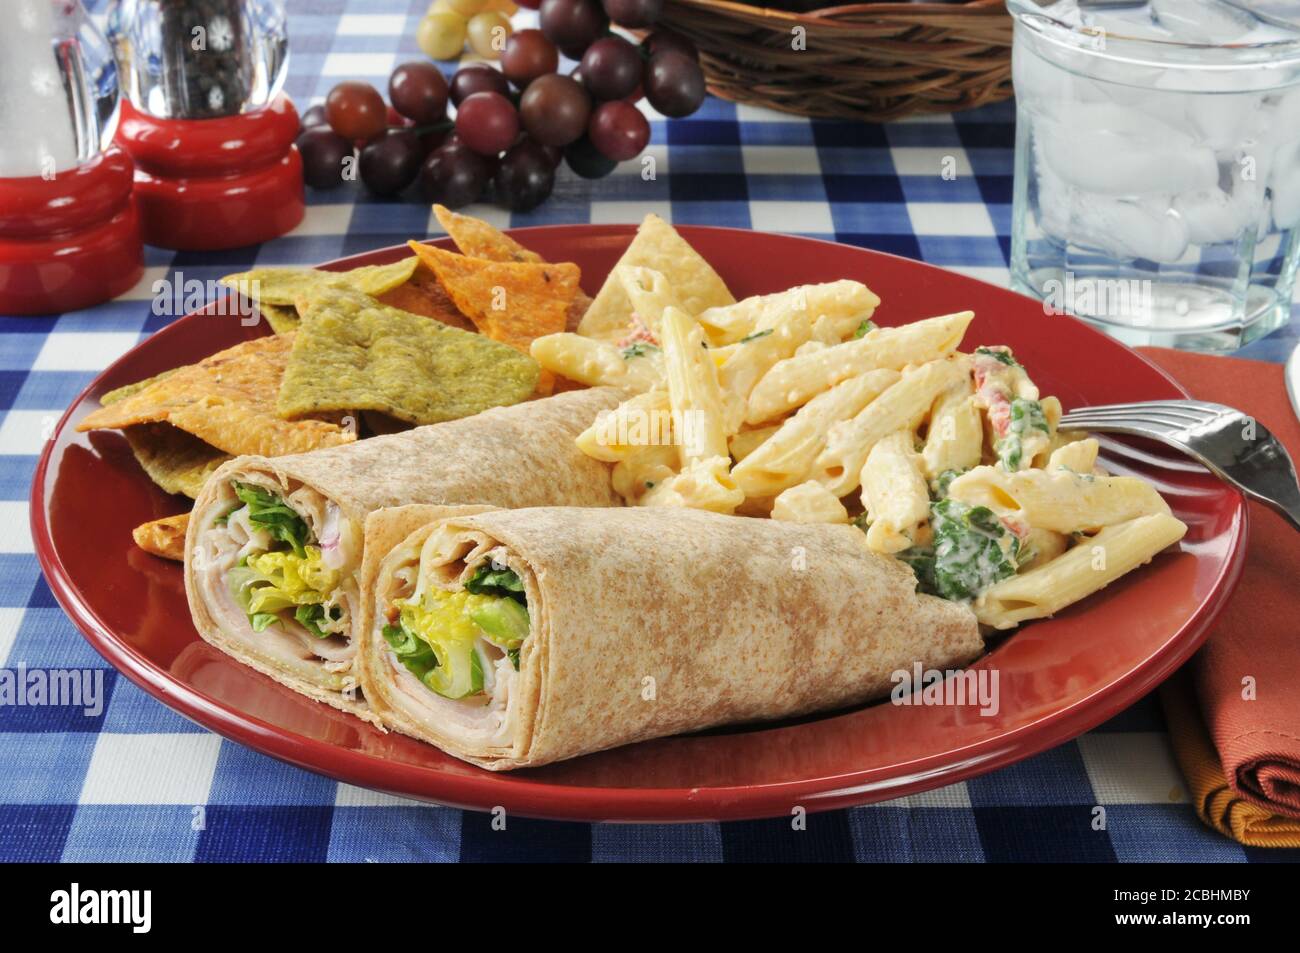 Turkey or chicken wrap sandwiches with mozzarella pasta salad and vegetable  tortilla chips Stock Photo - Alamy